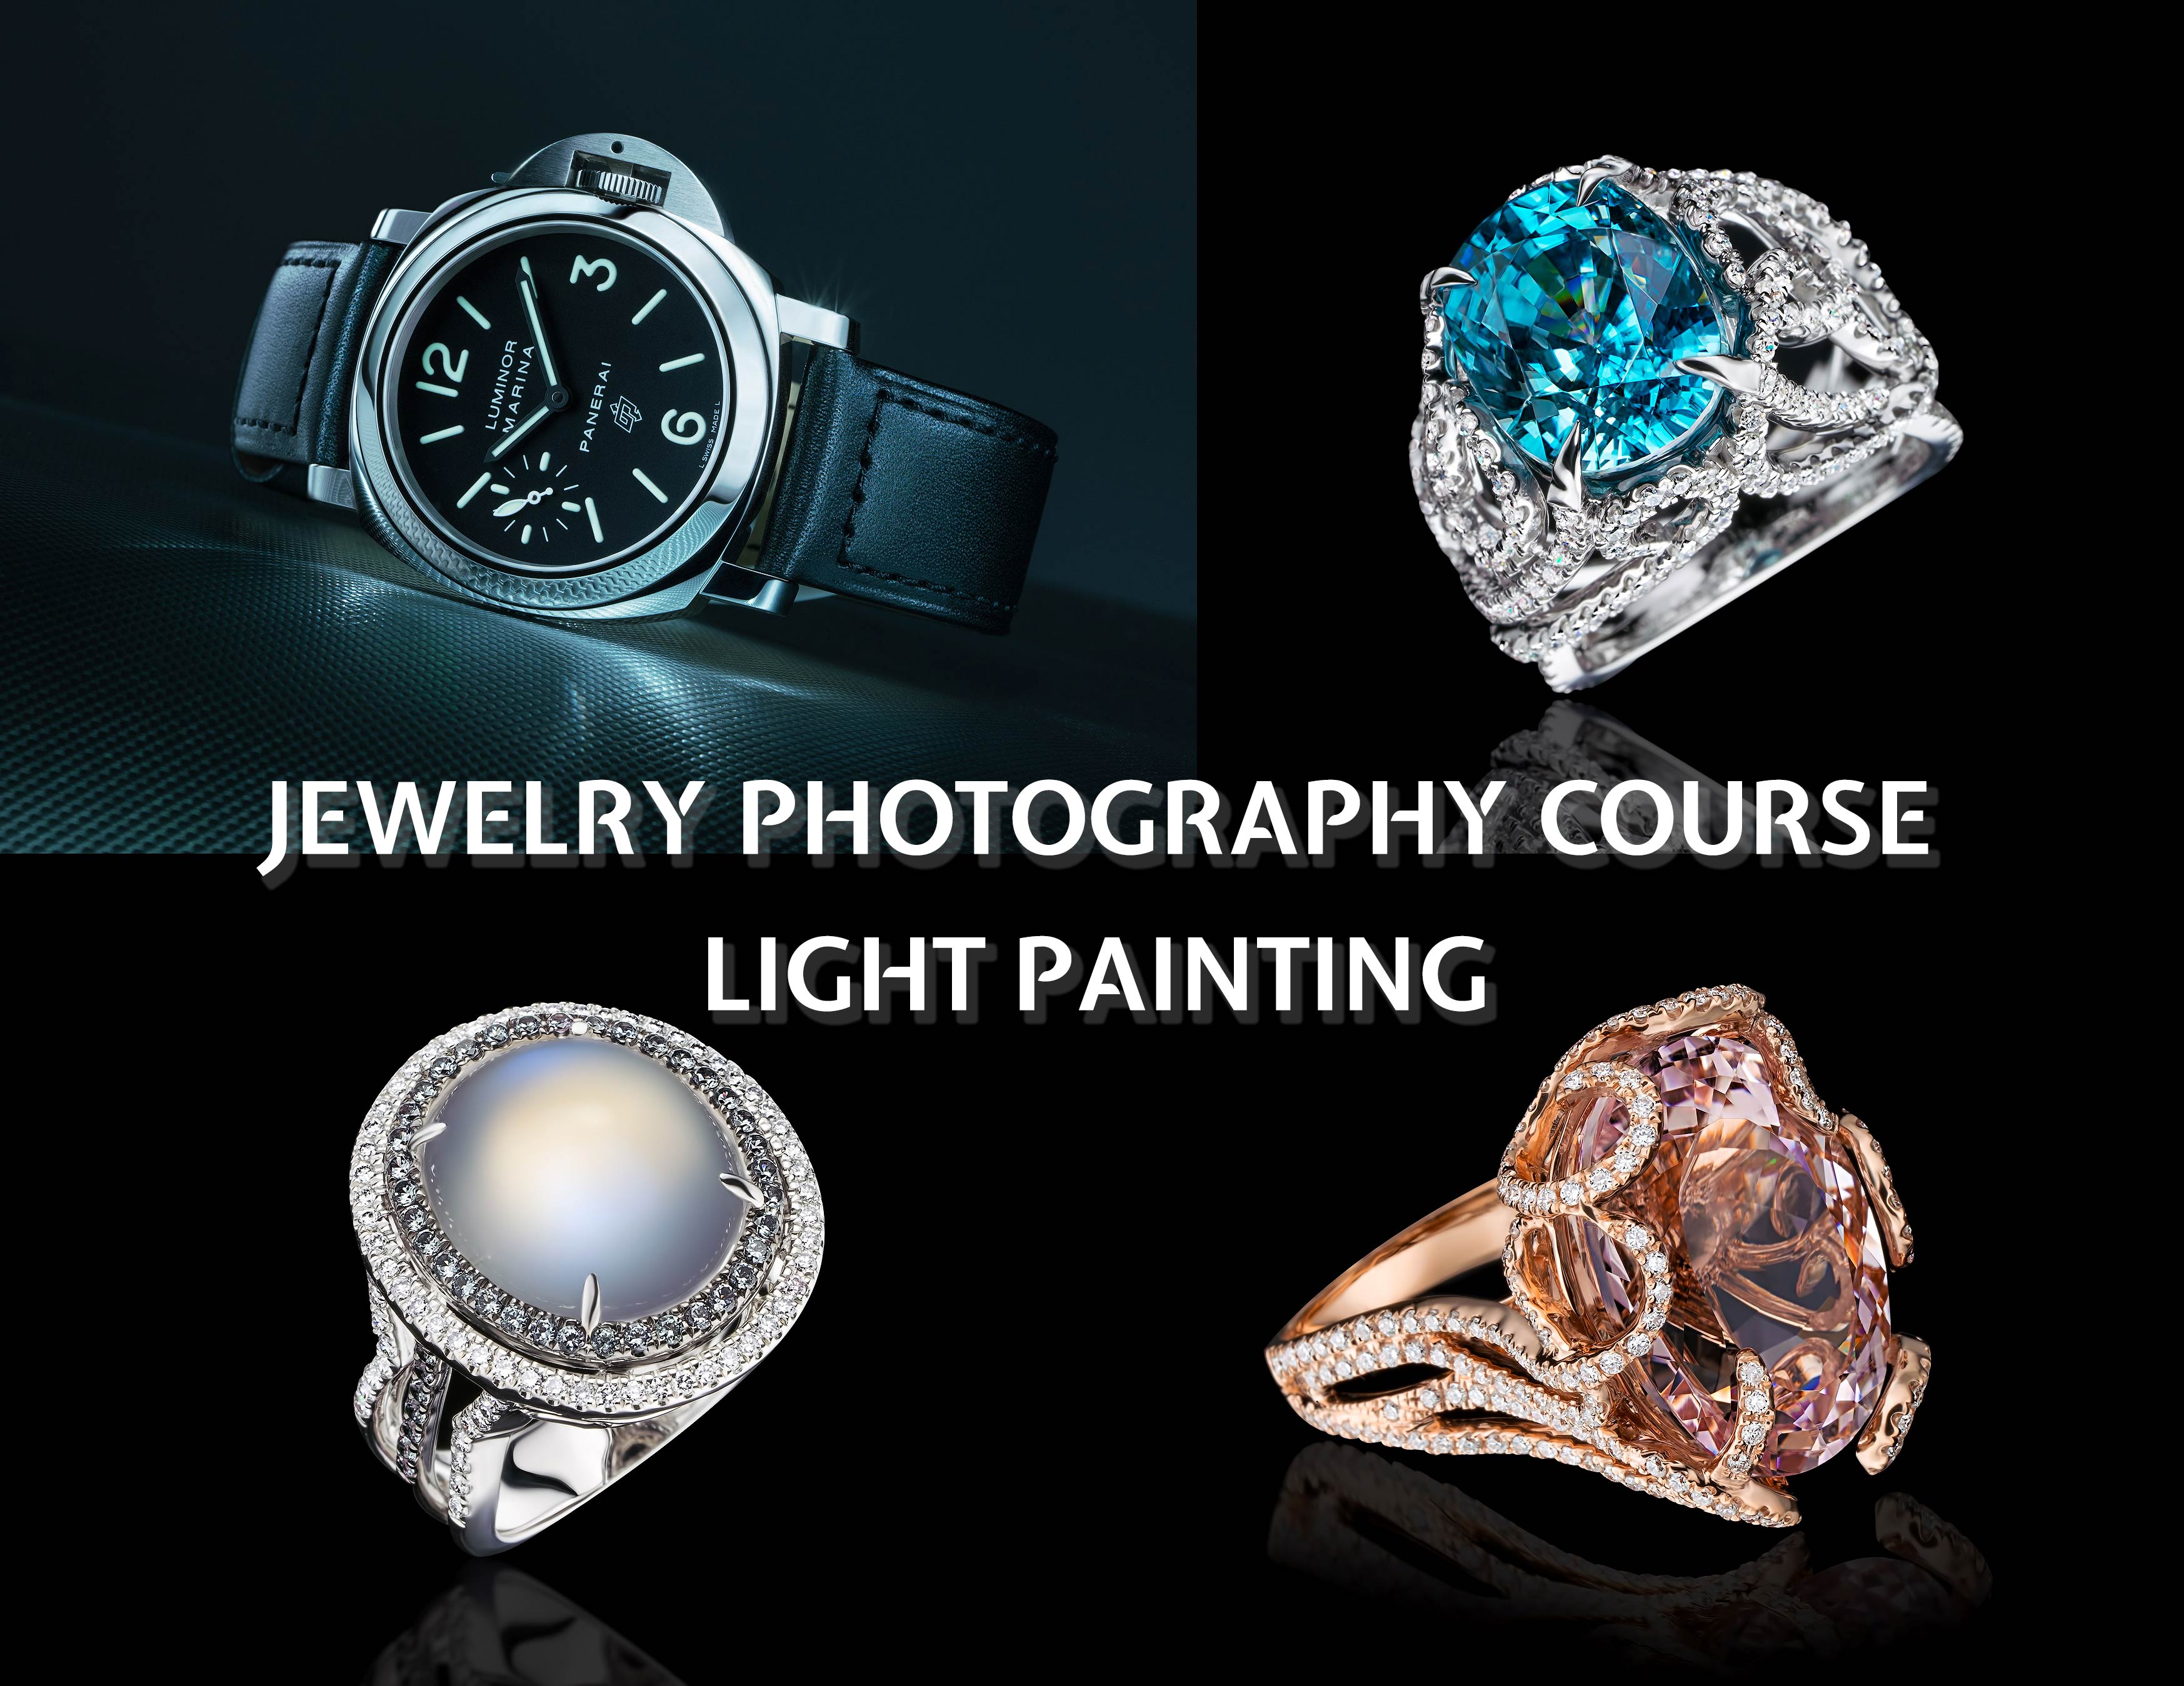 Jewelry Photography Course, Light Painting